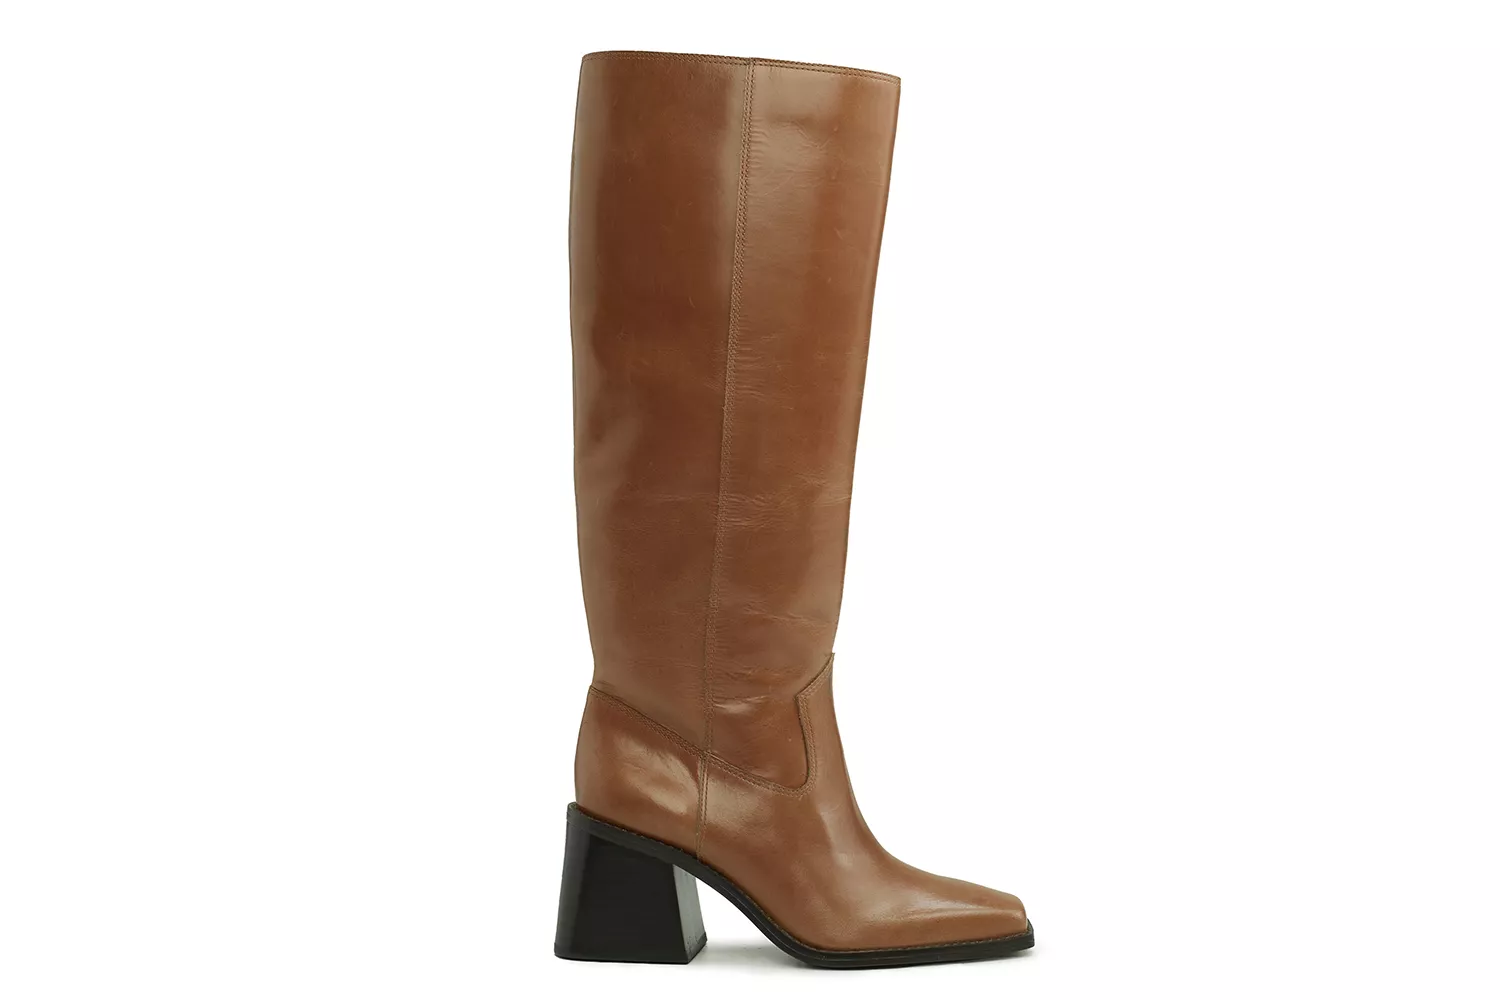  Vince Camuto Sangeti Wide-Calf Boot